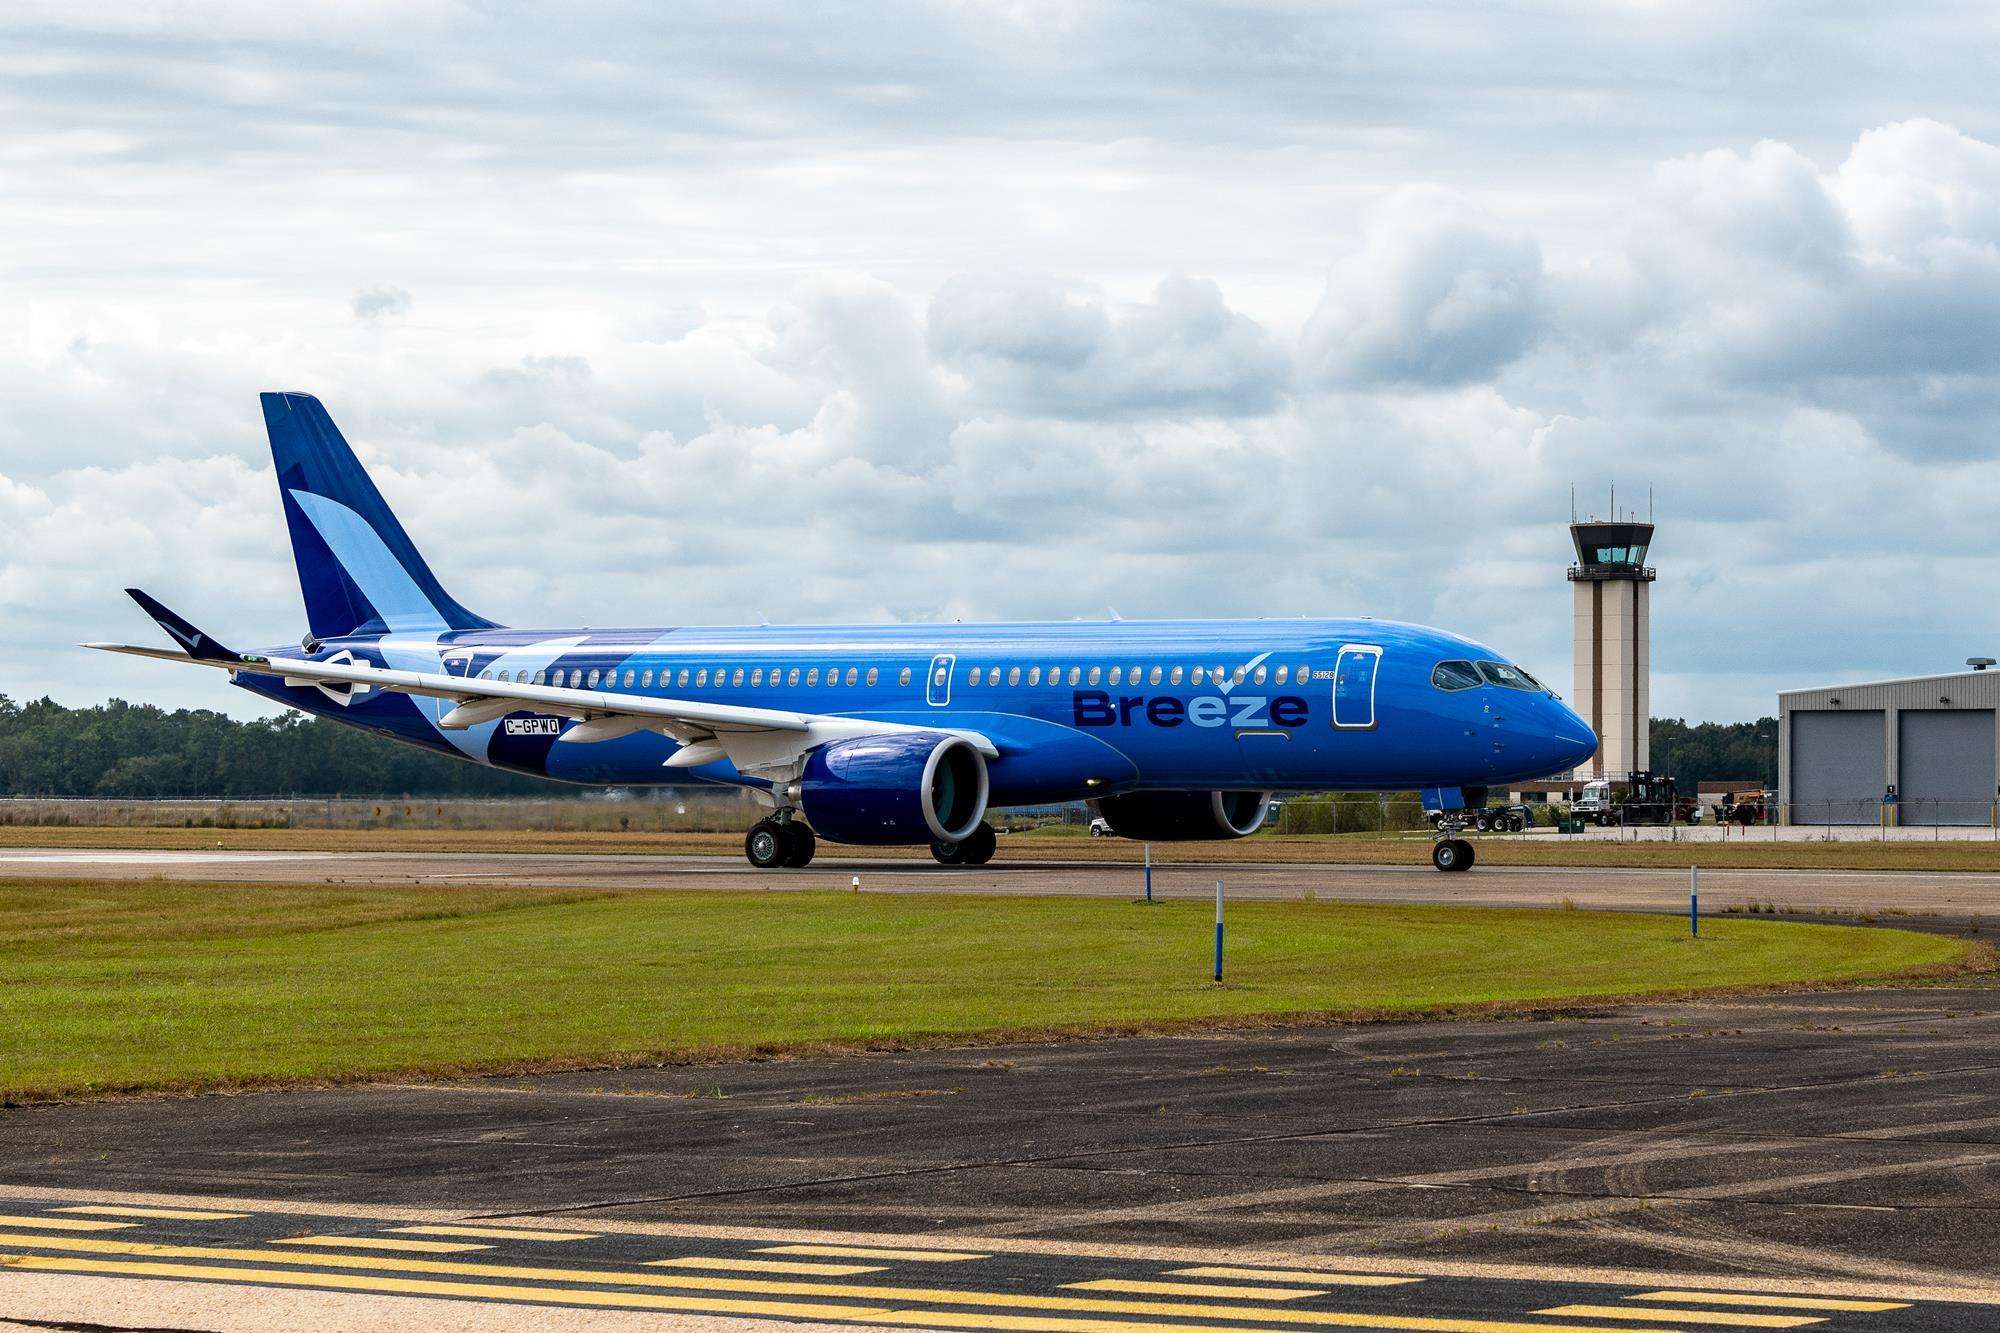 A Breeze Airways A220 on the taxiway.